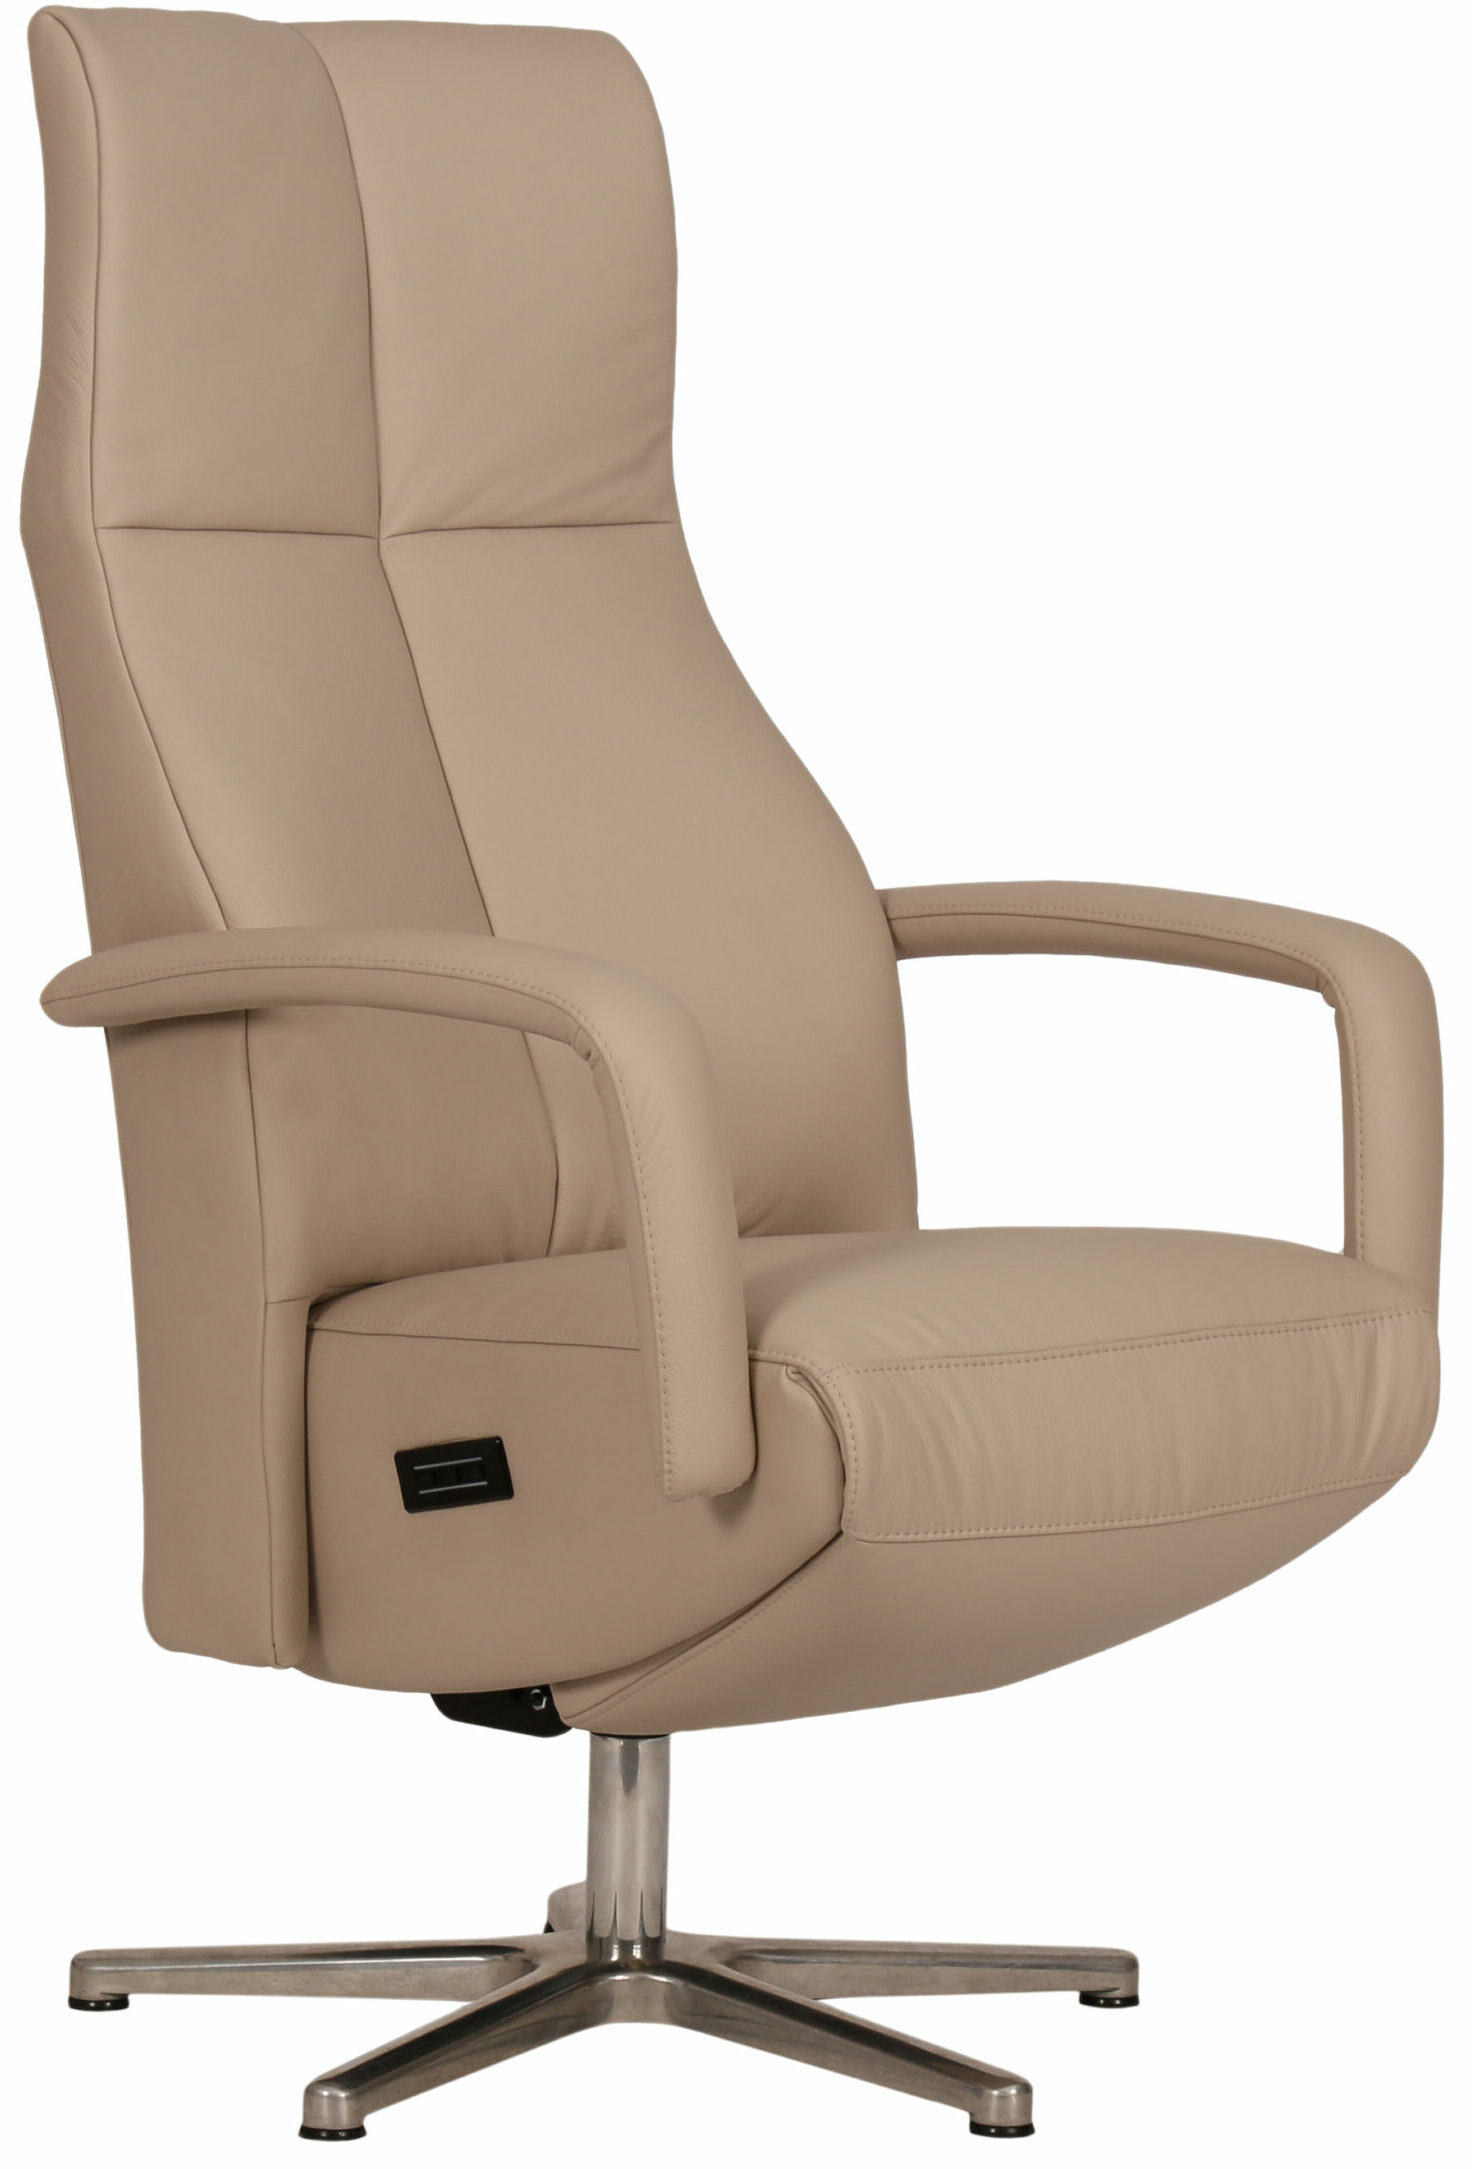 Twinz 202 relaxfauteuil